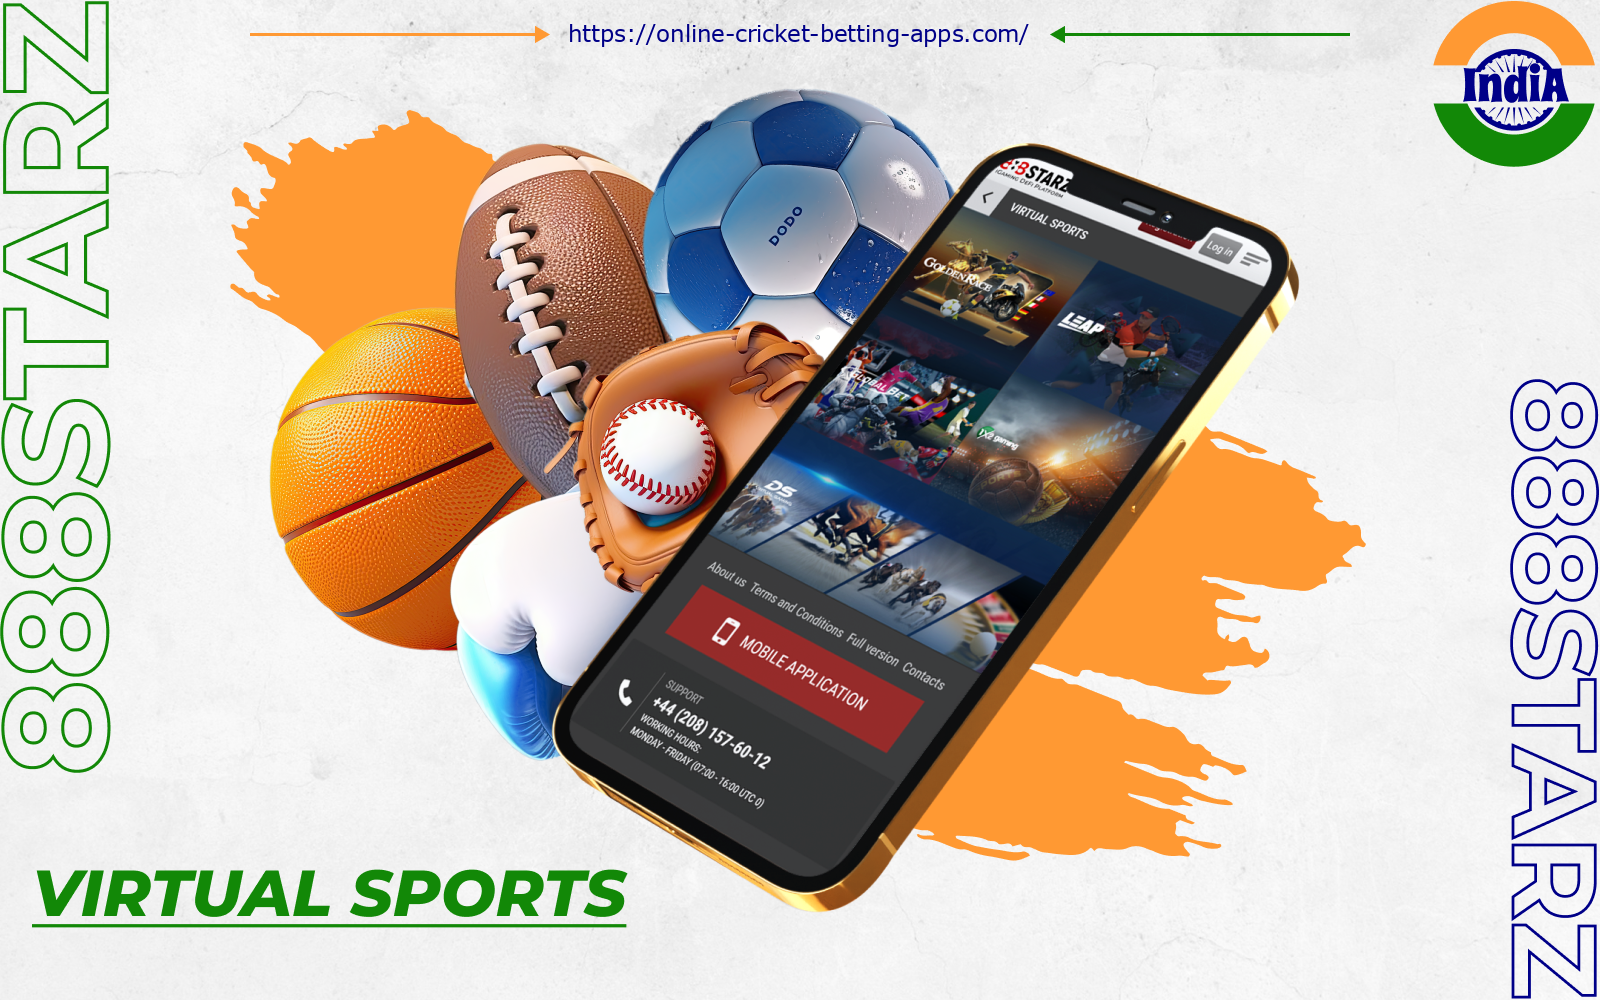 888 starz apk users from India can bet on virtual matches